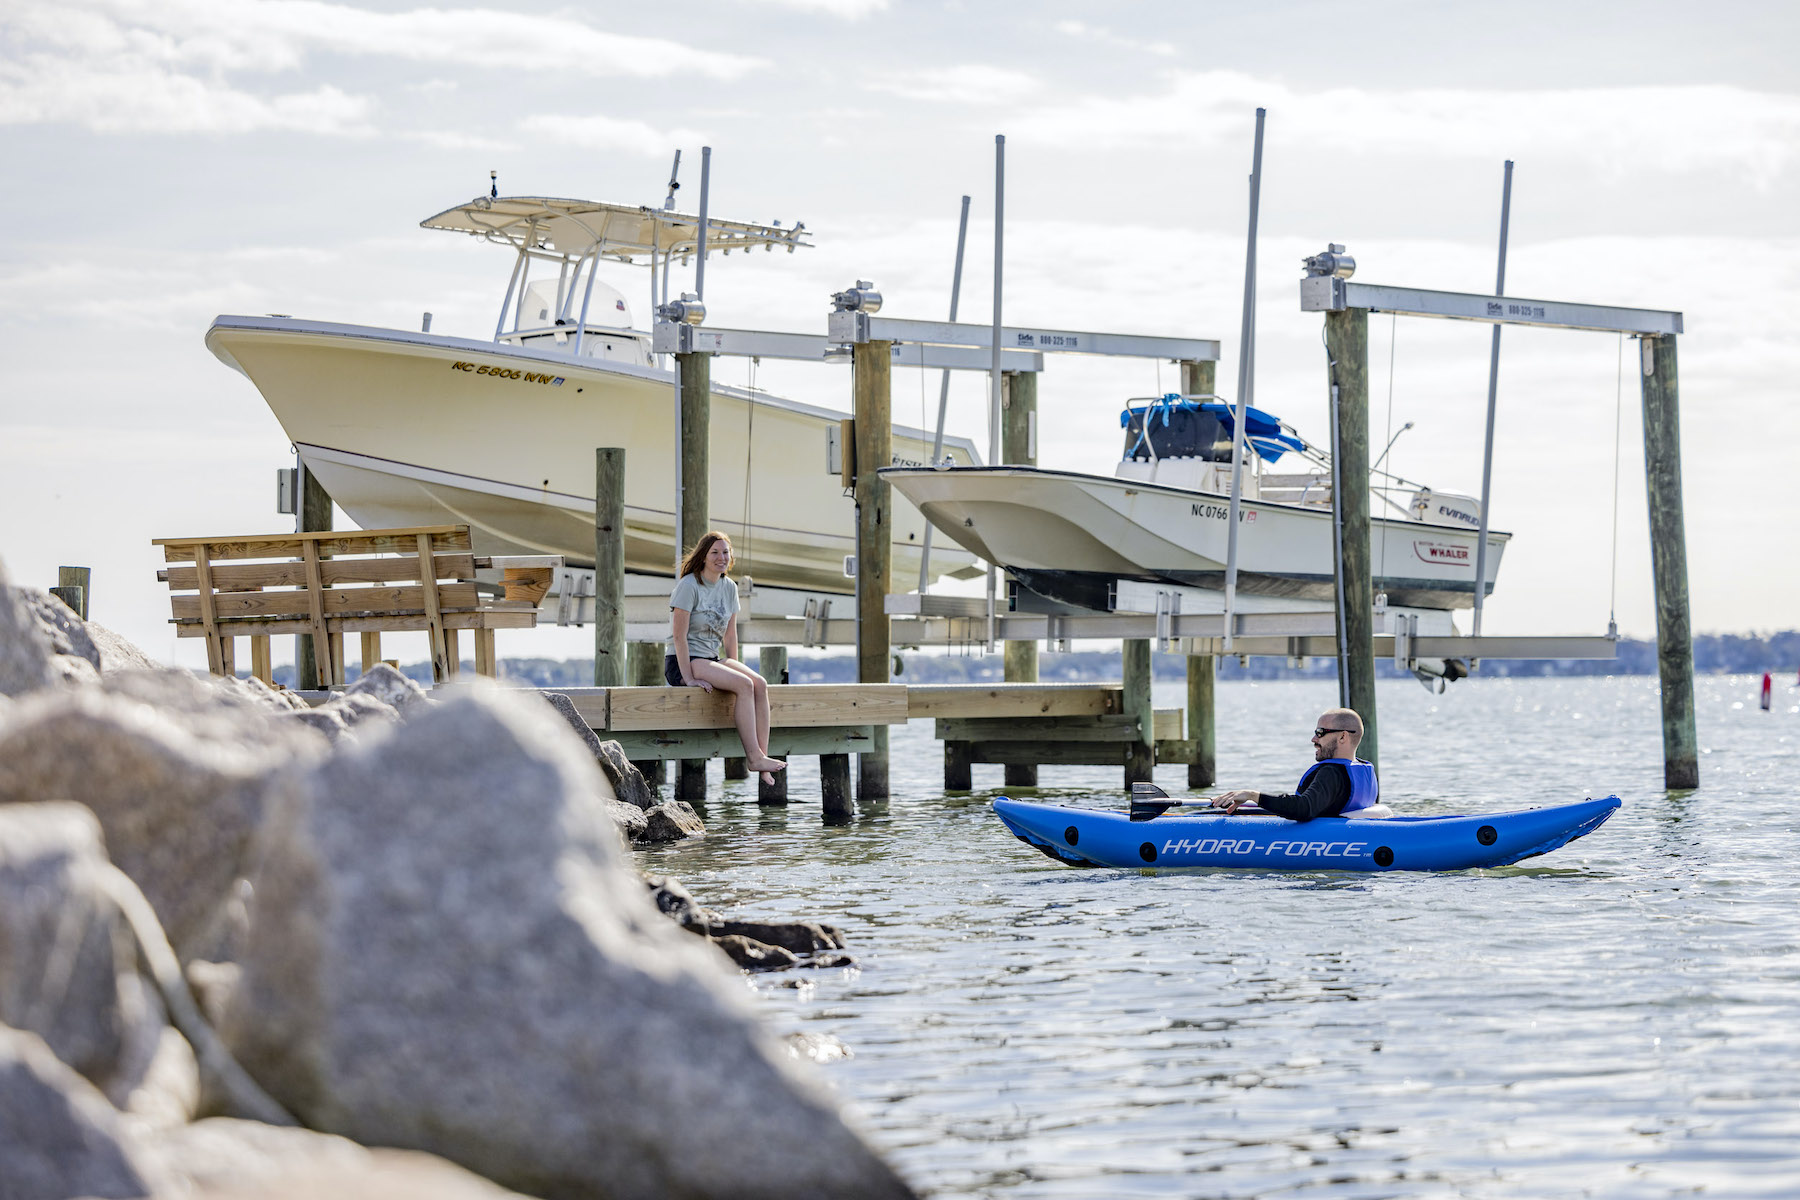 Man kayaking with woman sitting on pier with boats near the pier.